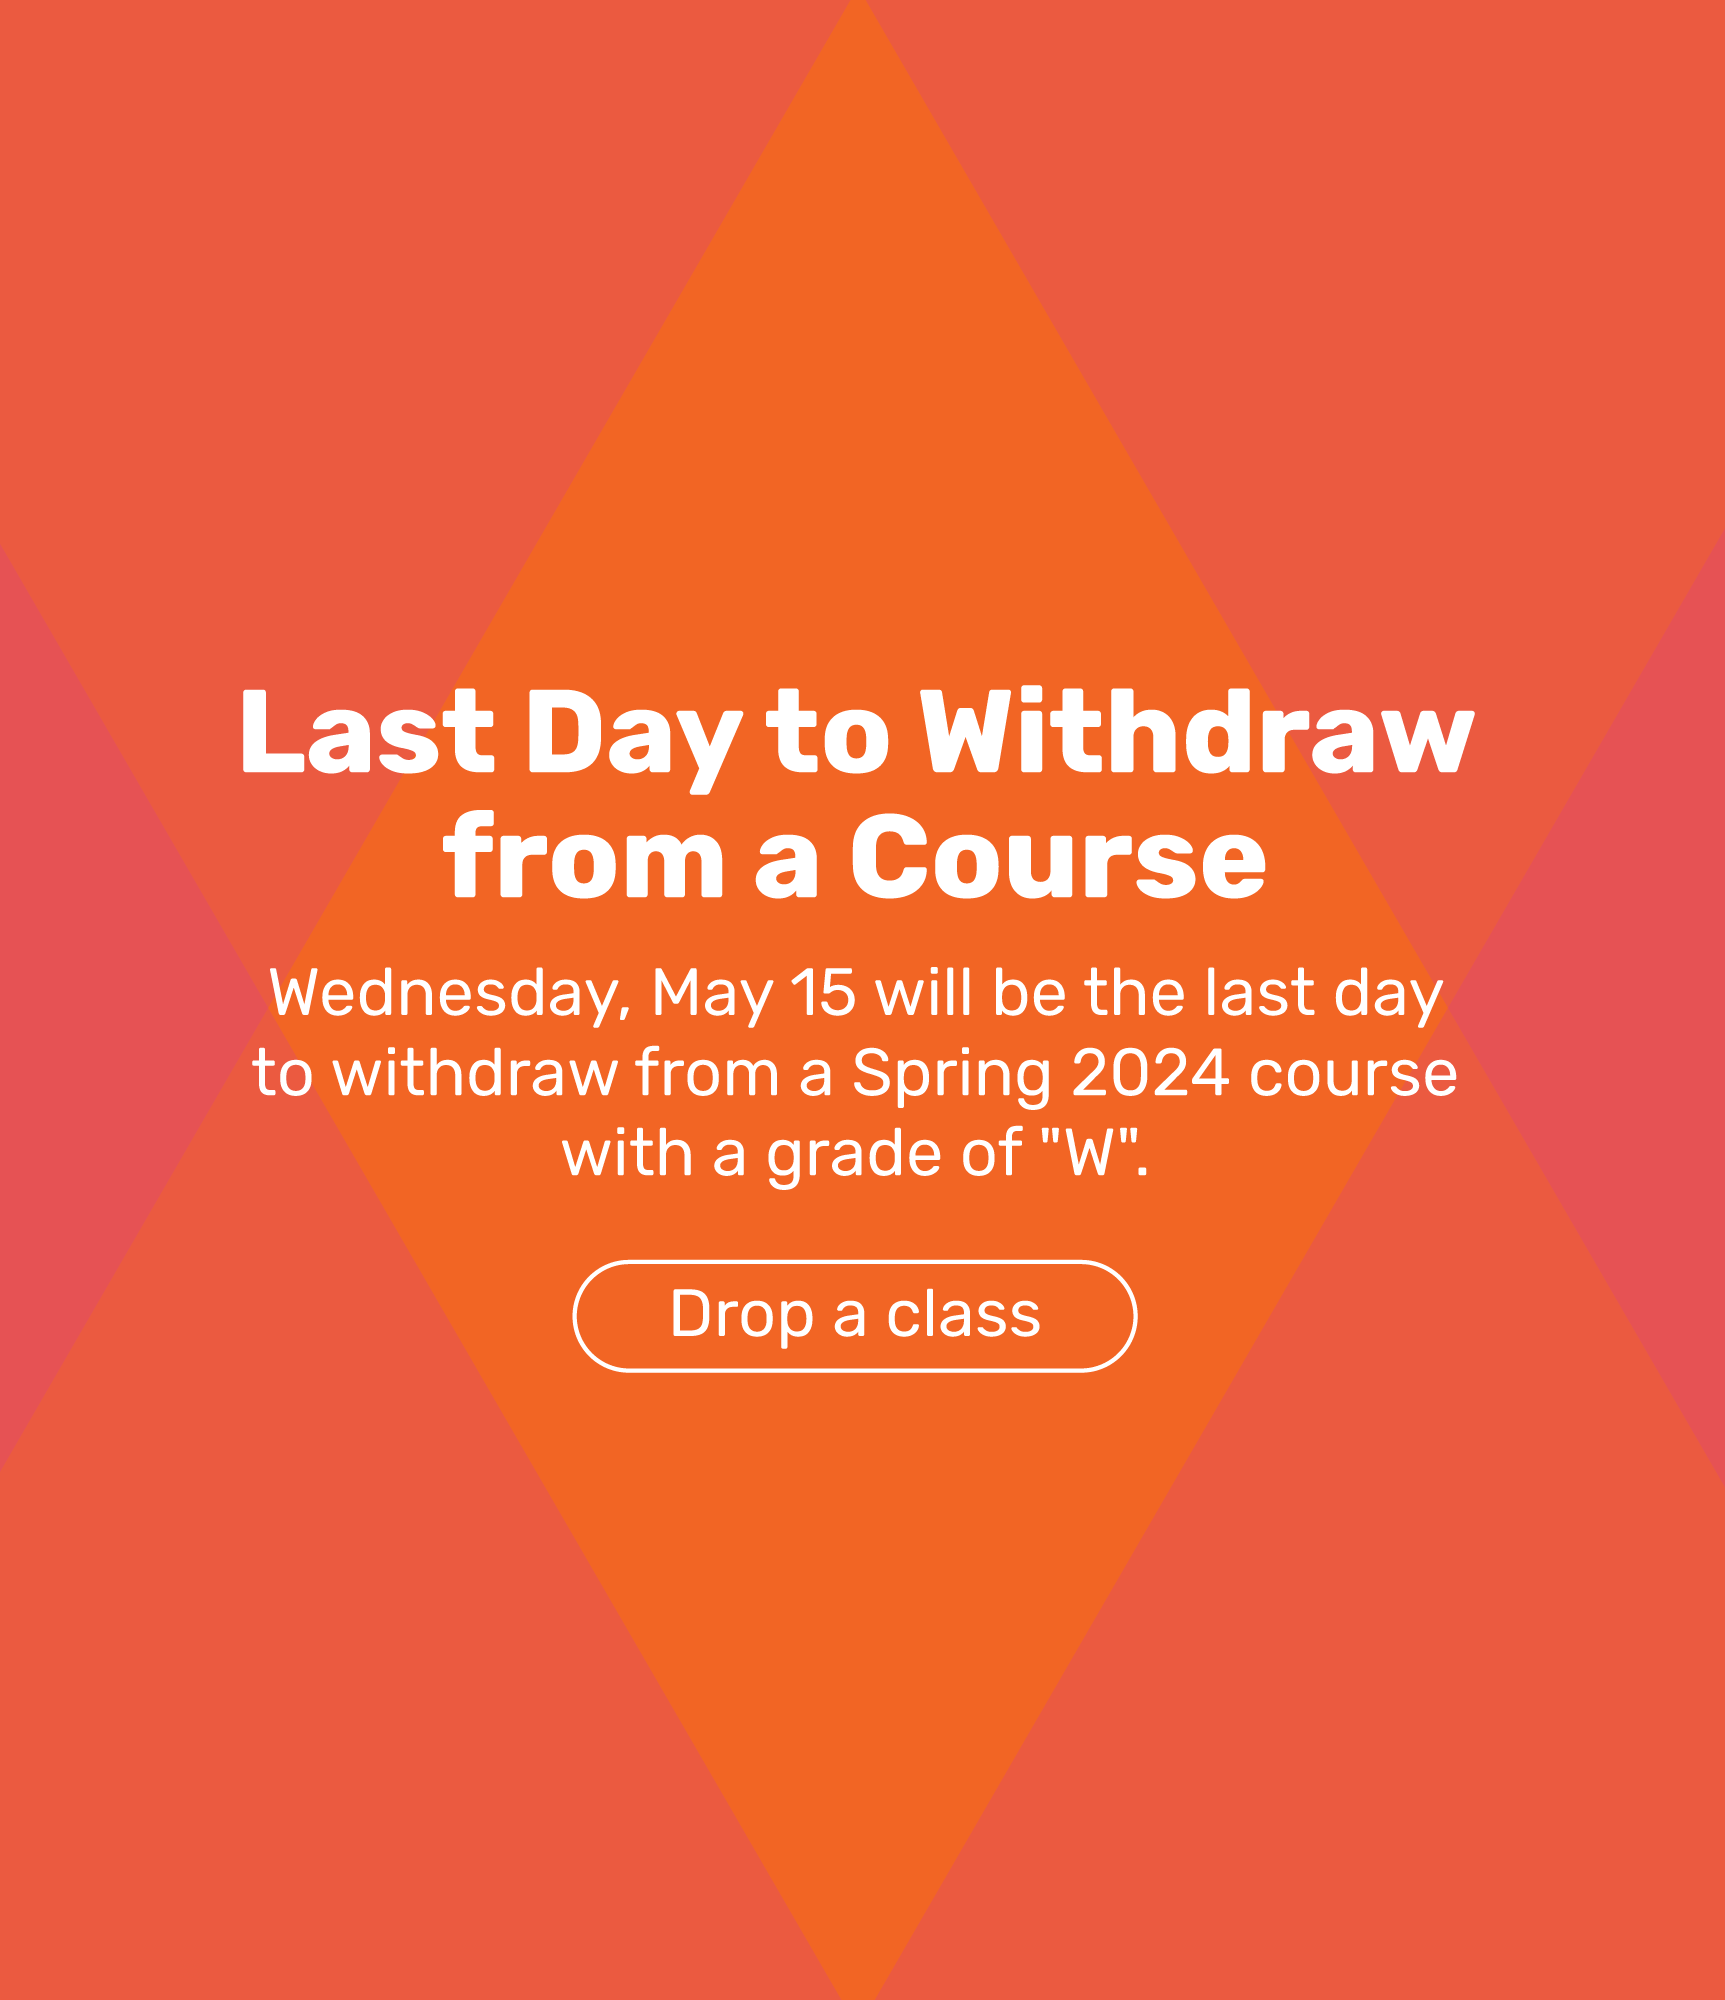 Last Day to Withdraw